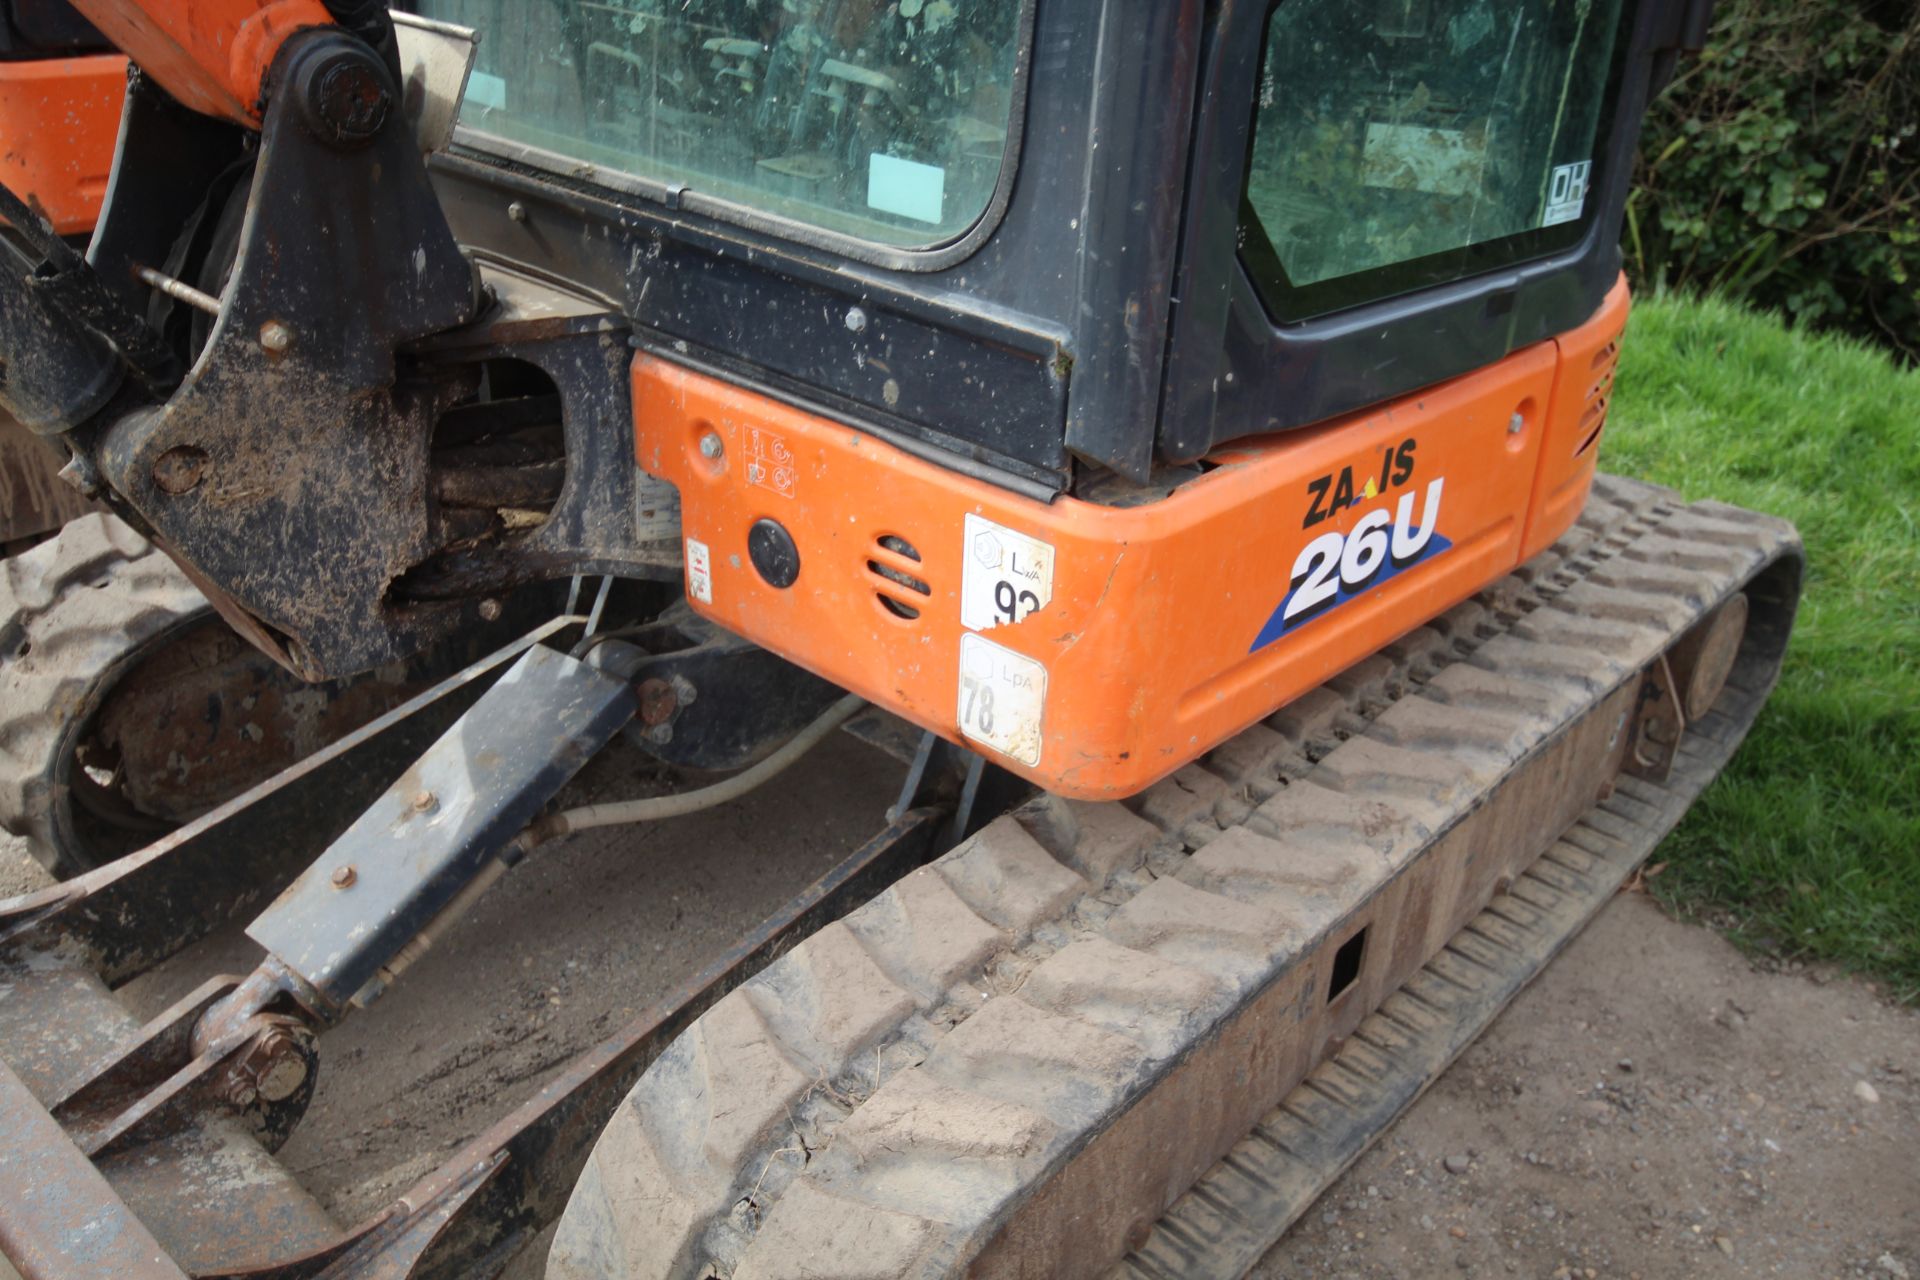 Hitachi Z-Axis 26U-5A CR 2.6T rubber track excavator. 2018. 3,000 hours. Serial number - Image 27 of 57